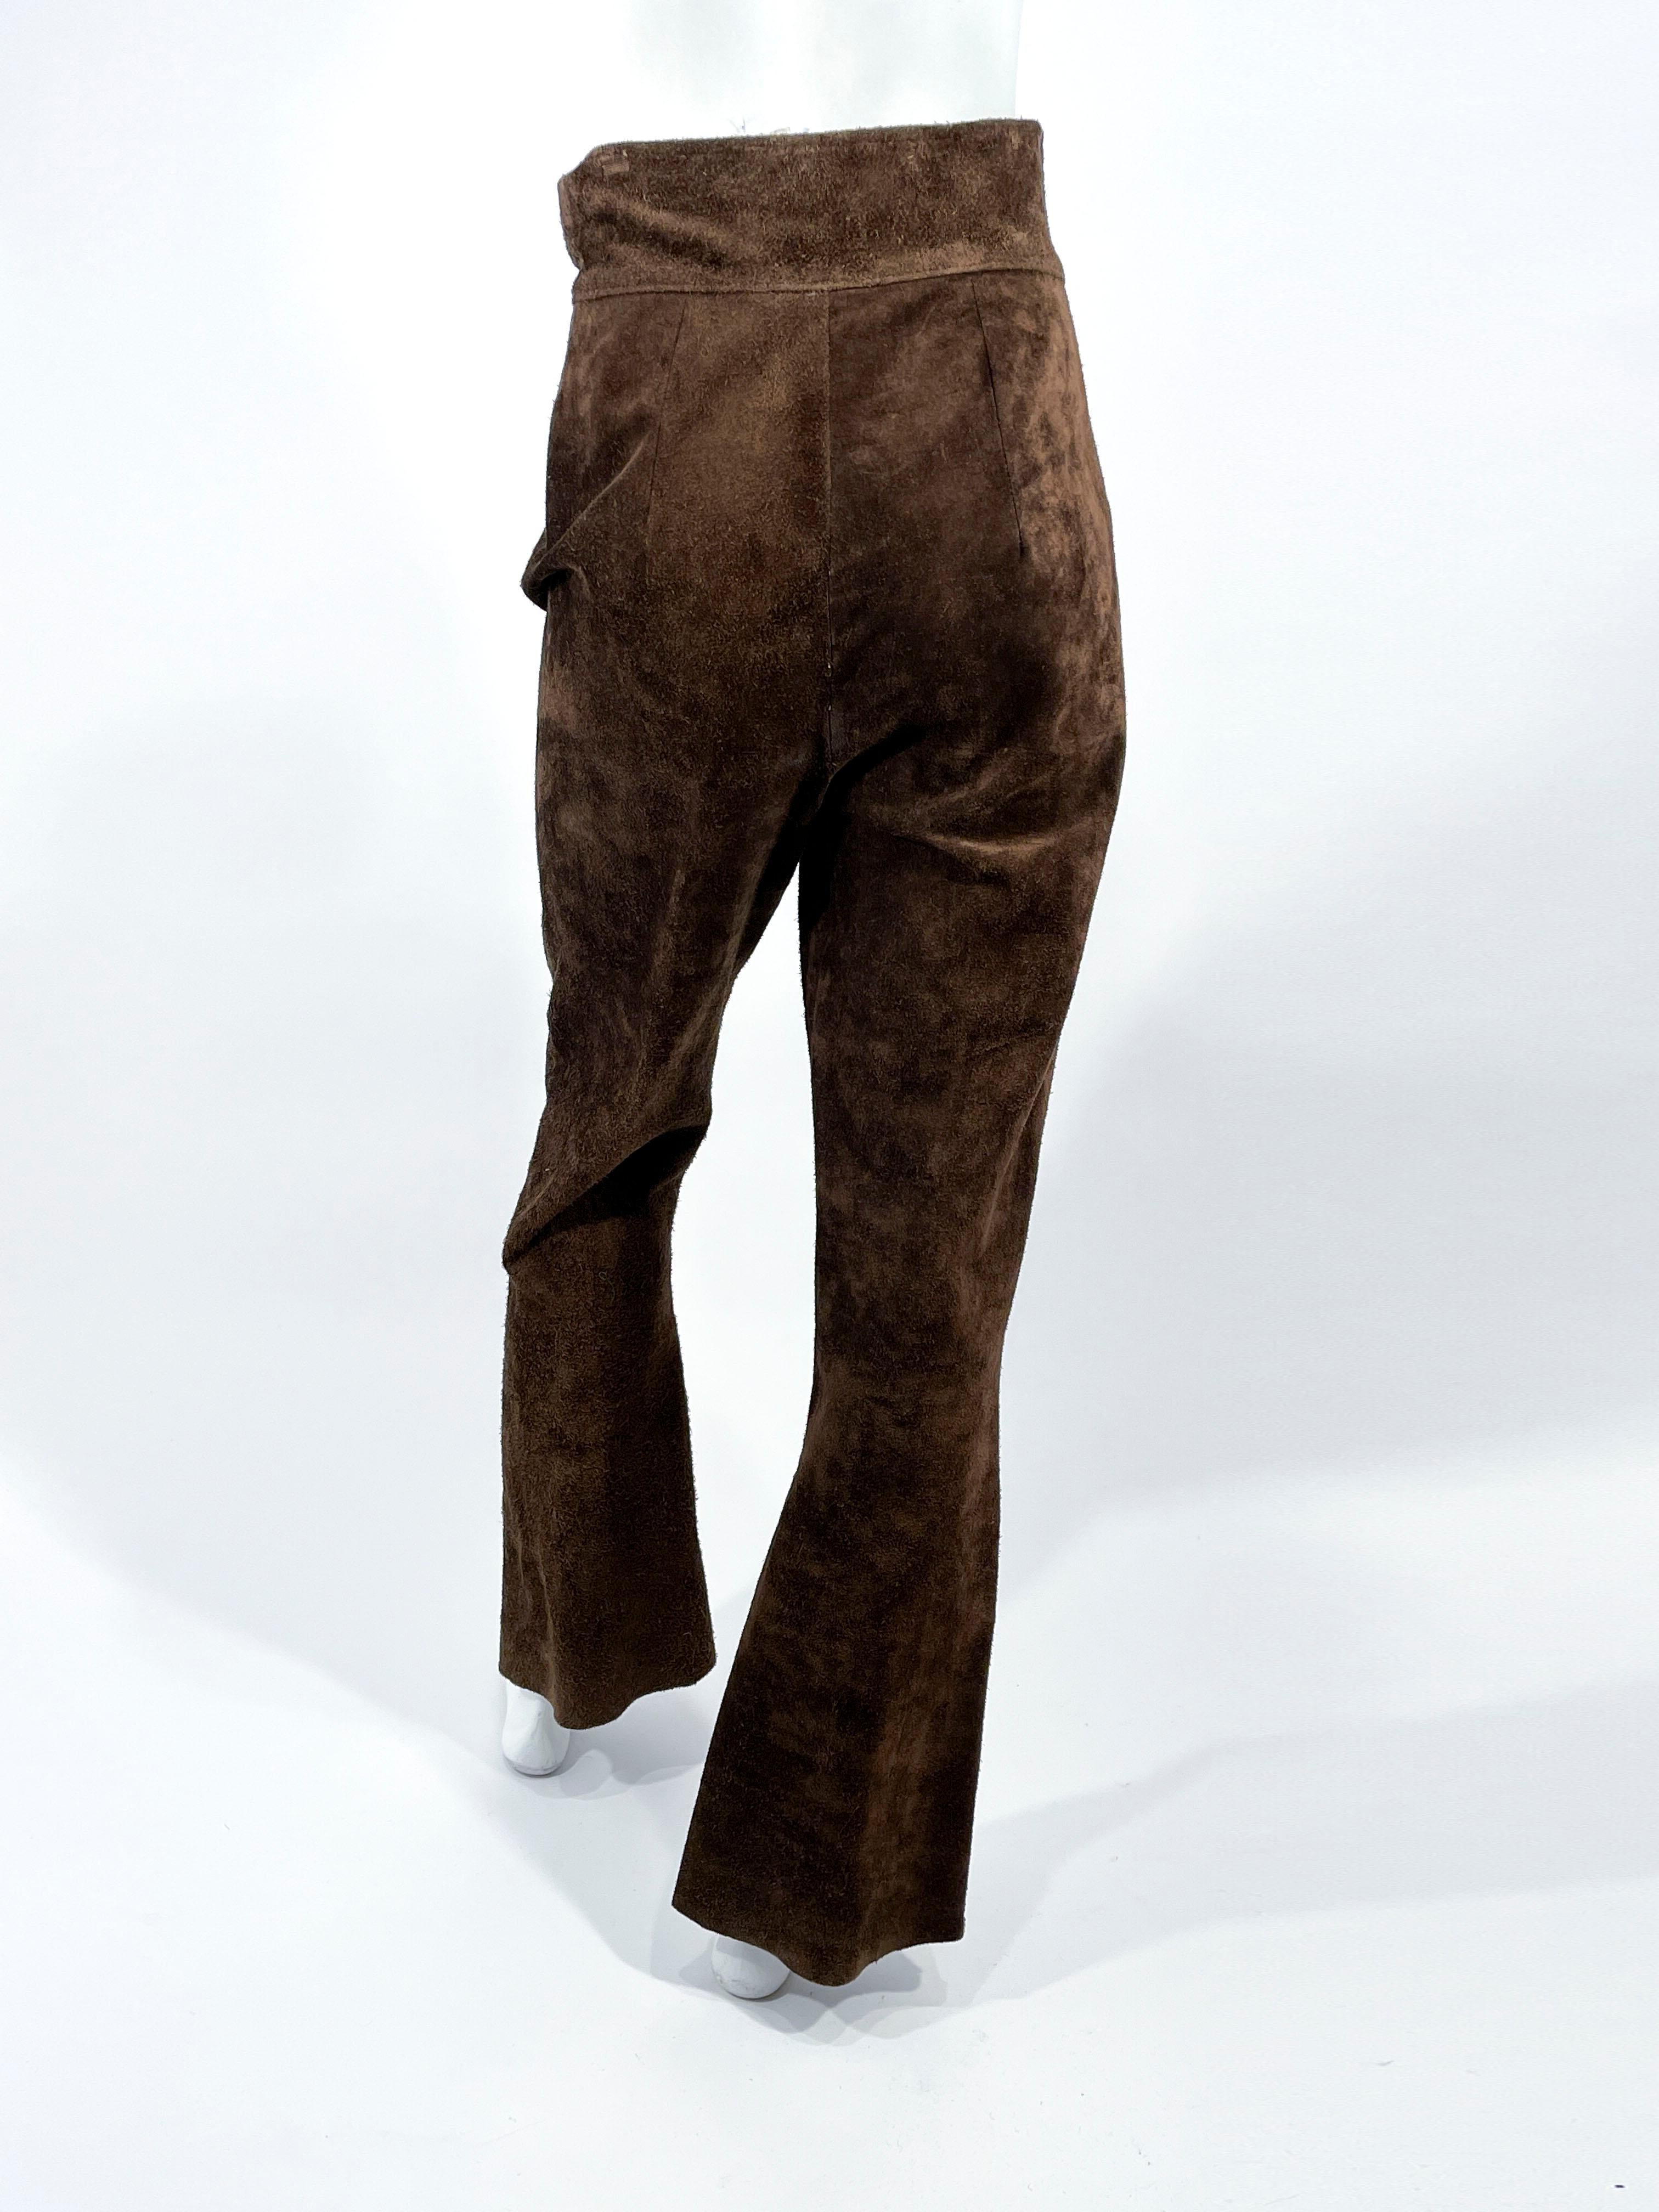 Women's 1960s/1970s Chocolate Brown Suede Pants For Sale